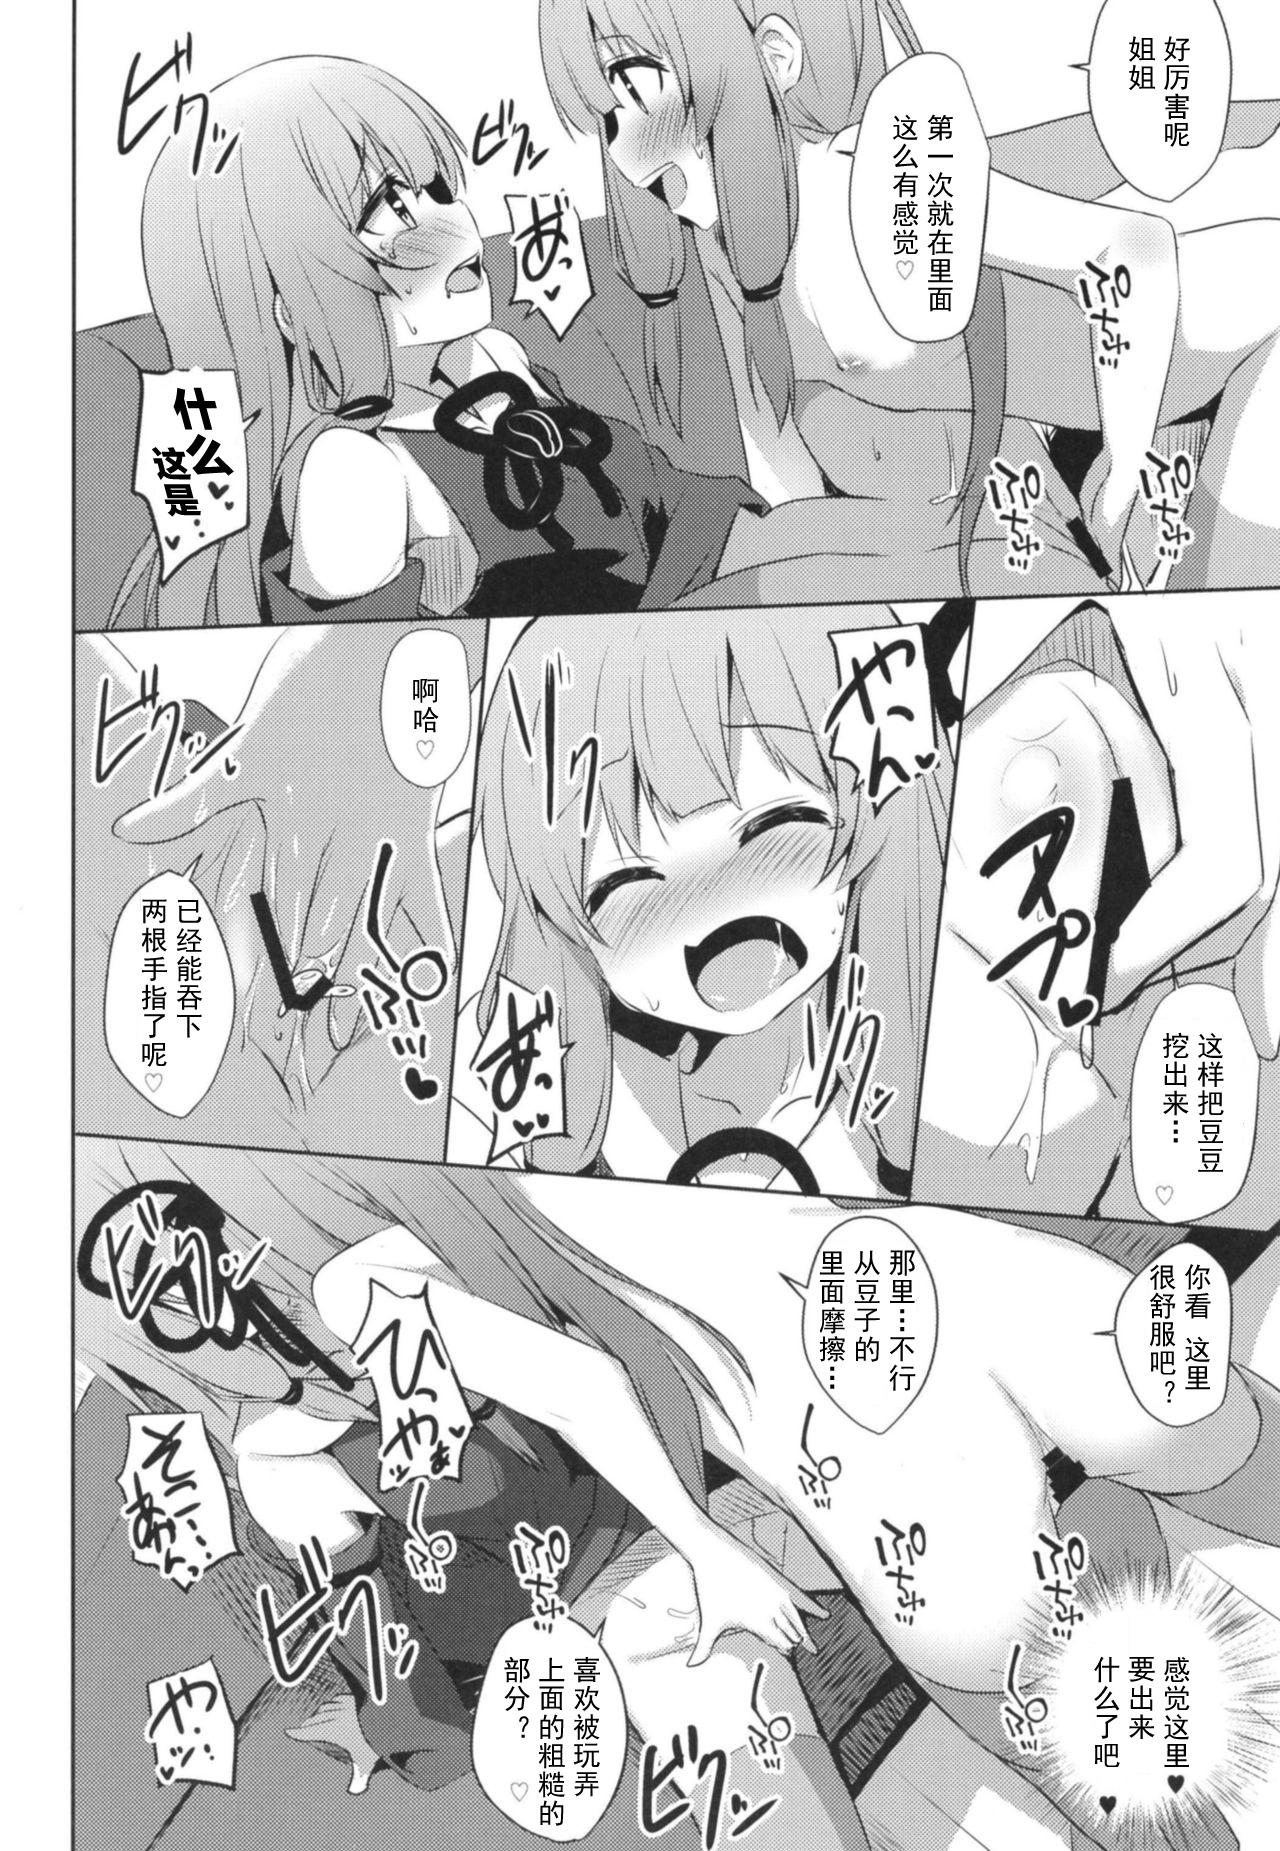 Daring [Milk Pudding (Jamcy)] Akane-chan Challenge! 4-kaime (VOICEROID) [Chinese] [古早个人汉化] [Digital] - Voiceroid Caiu Na Net - Page 8